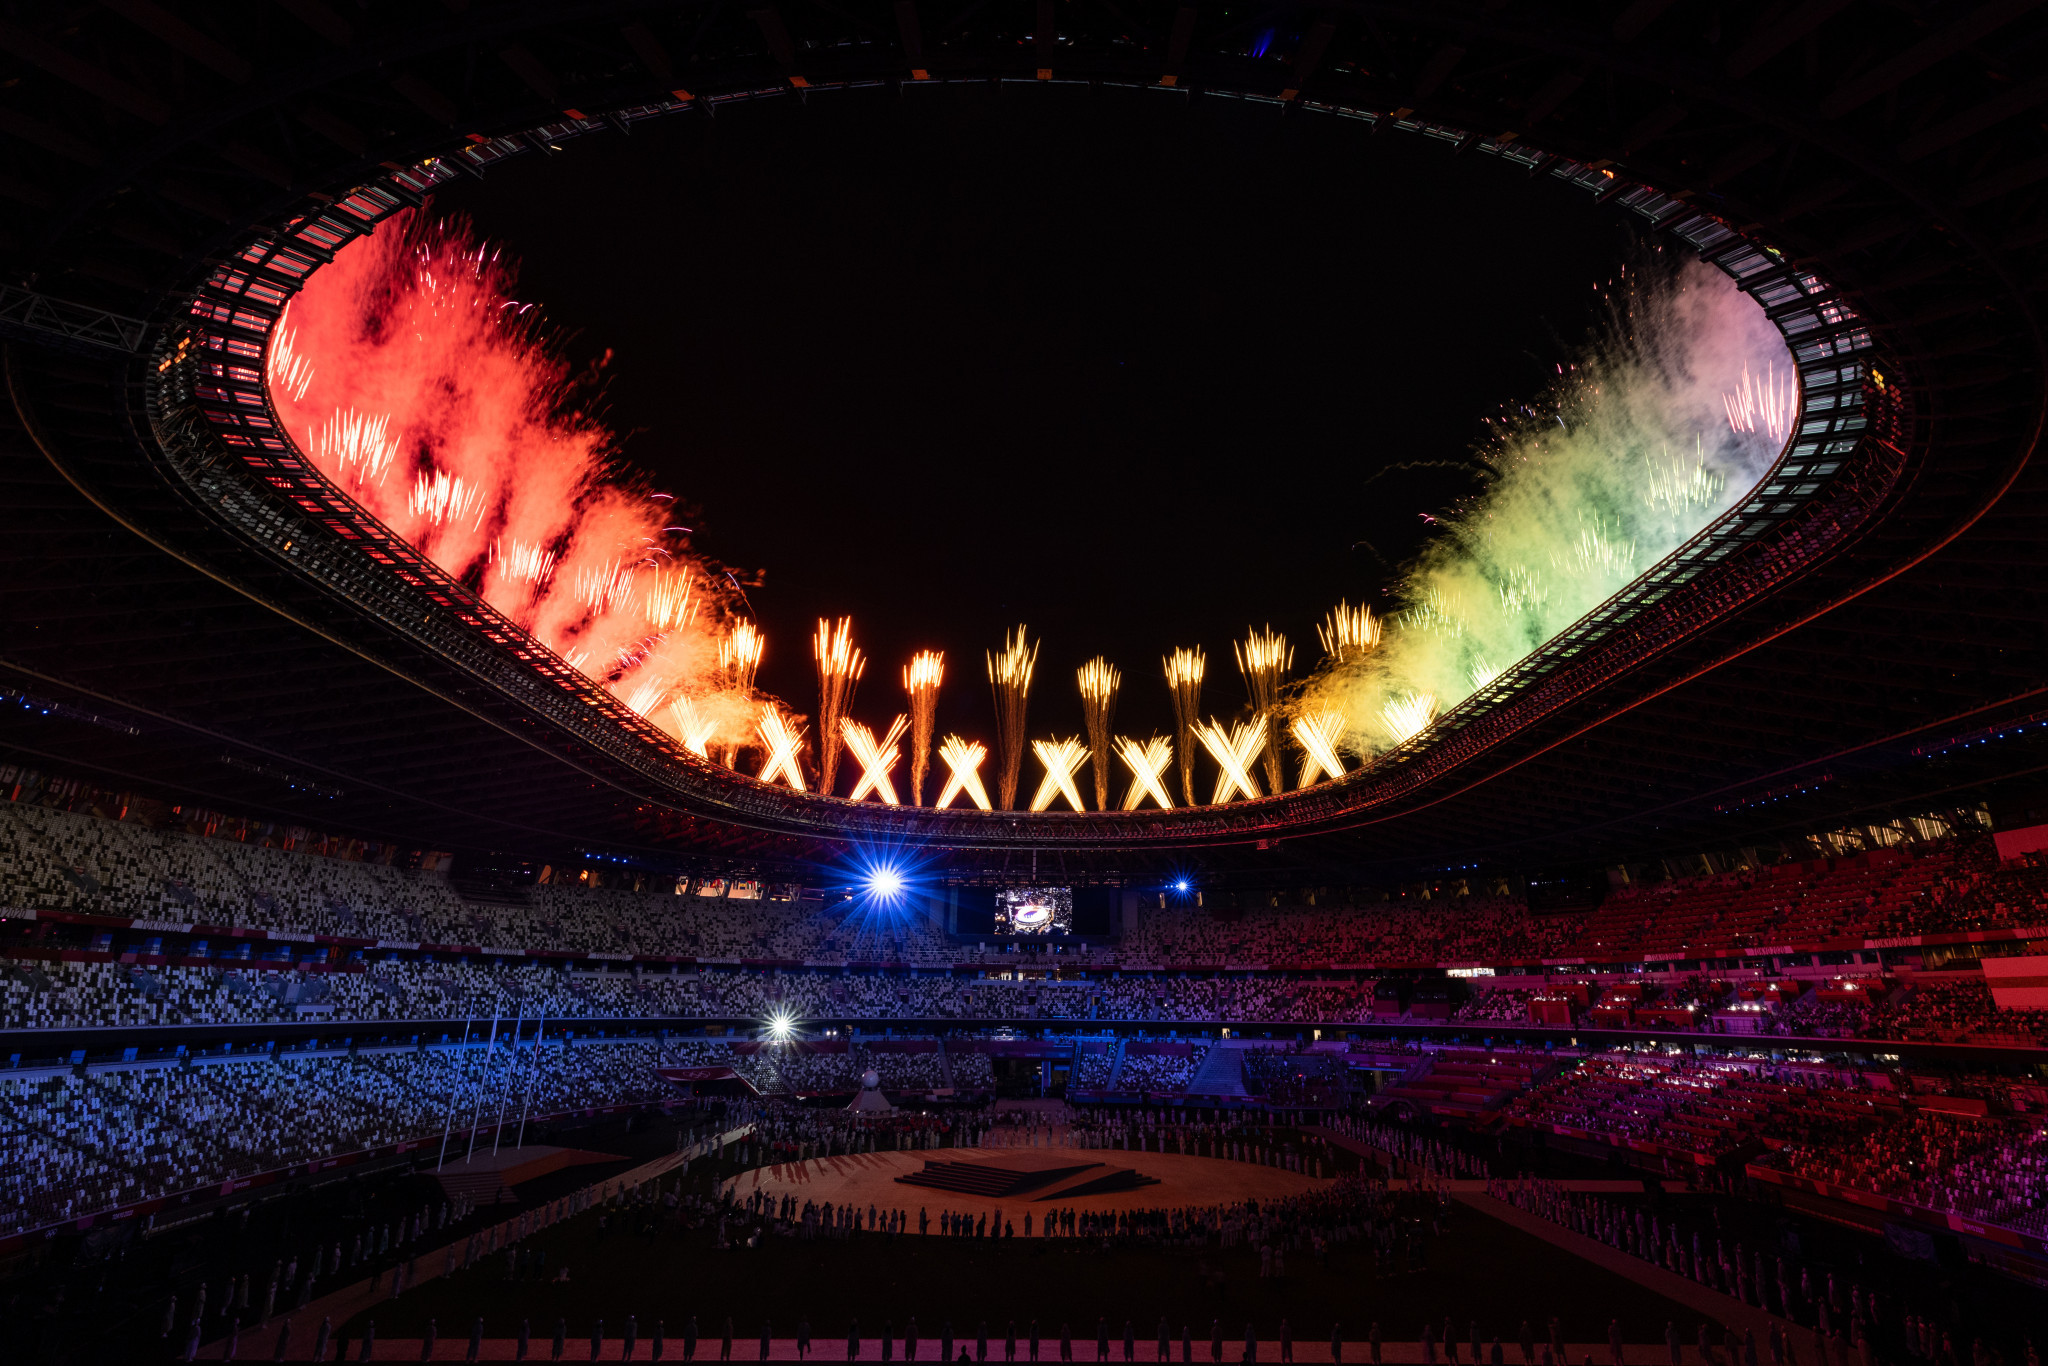 Official film of Tokyo 2020 Olympics selected for Cannes Film Festival